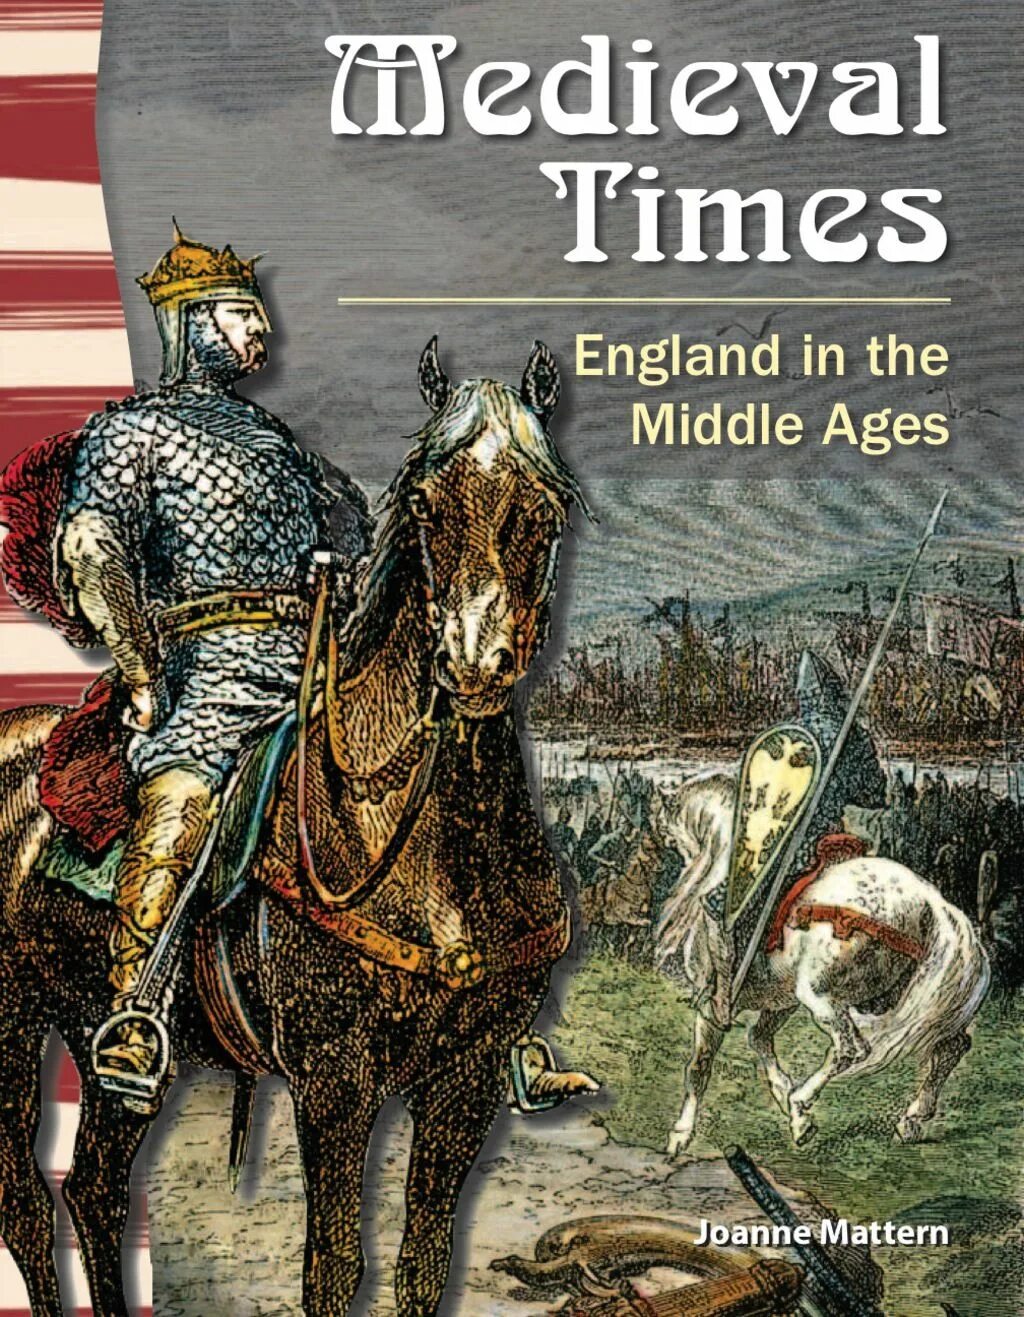 English story book. Middle ages in England time. English story books. Medieval times. History of England book.